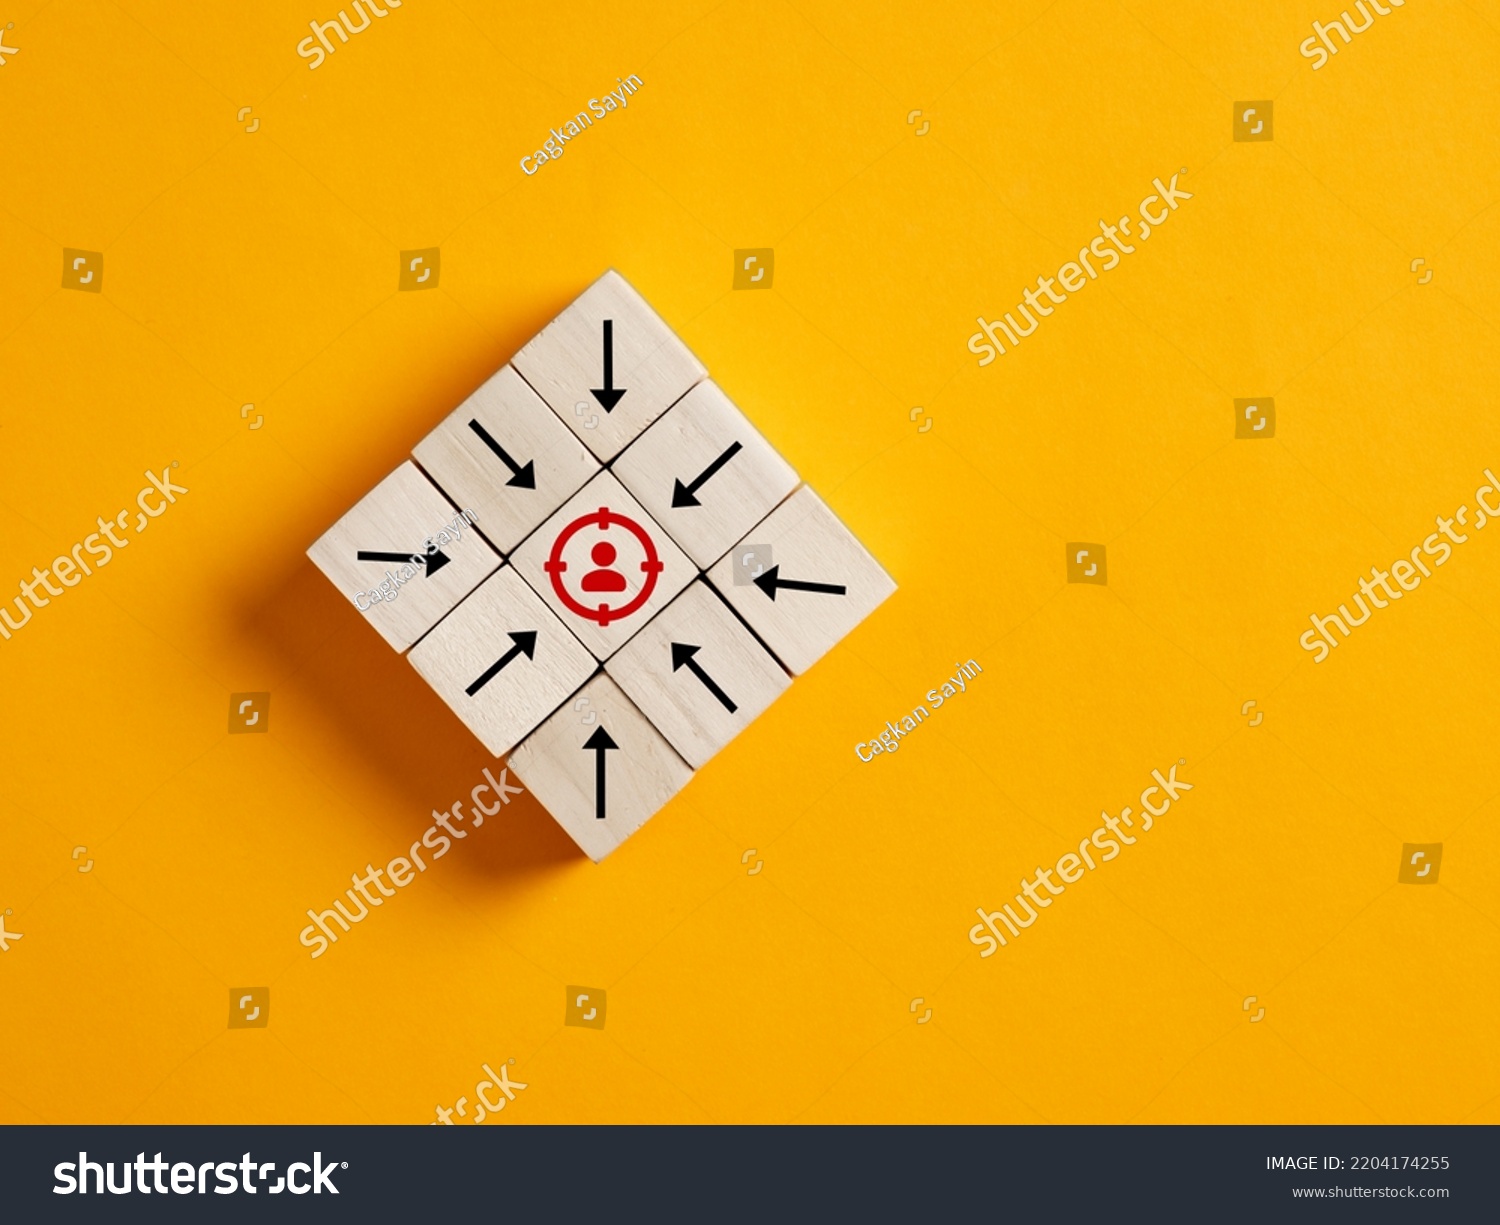 Arrows on wooden cubes pointing towards the focused target customer. Target customer, buyer persona, marketing segmentation or job recruitment concepts. #2204174255